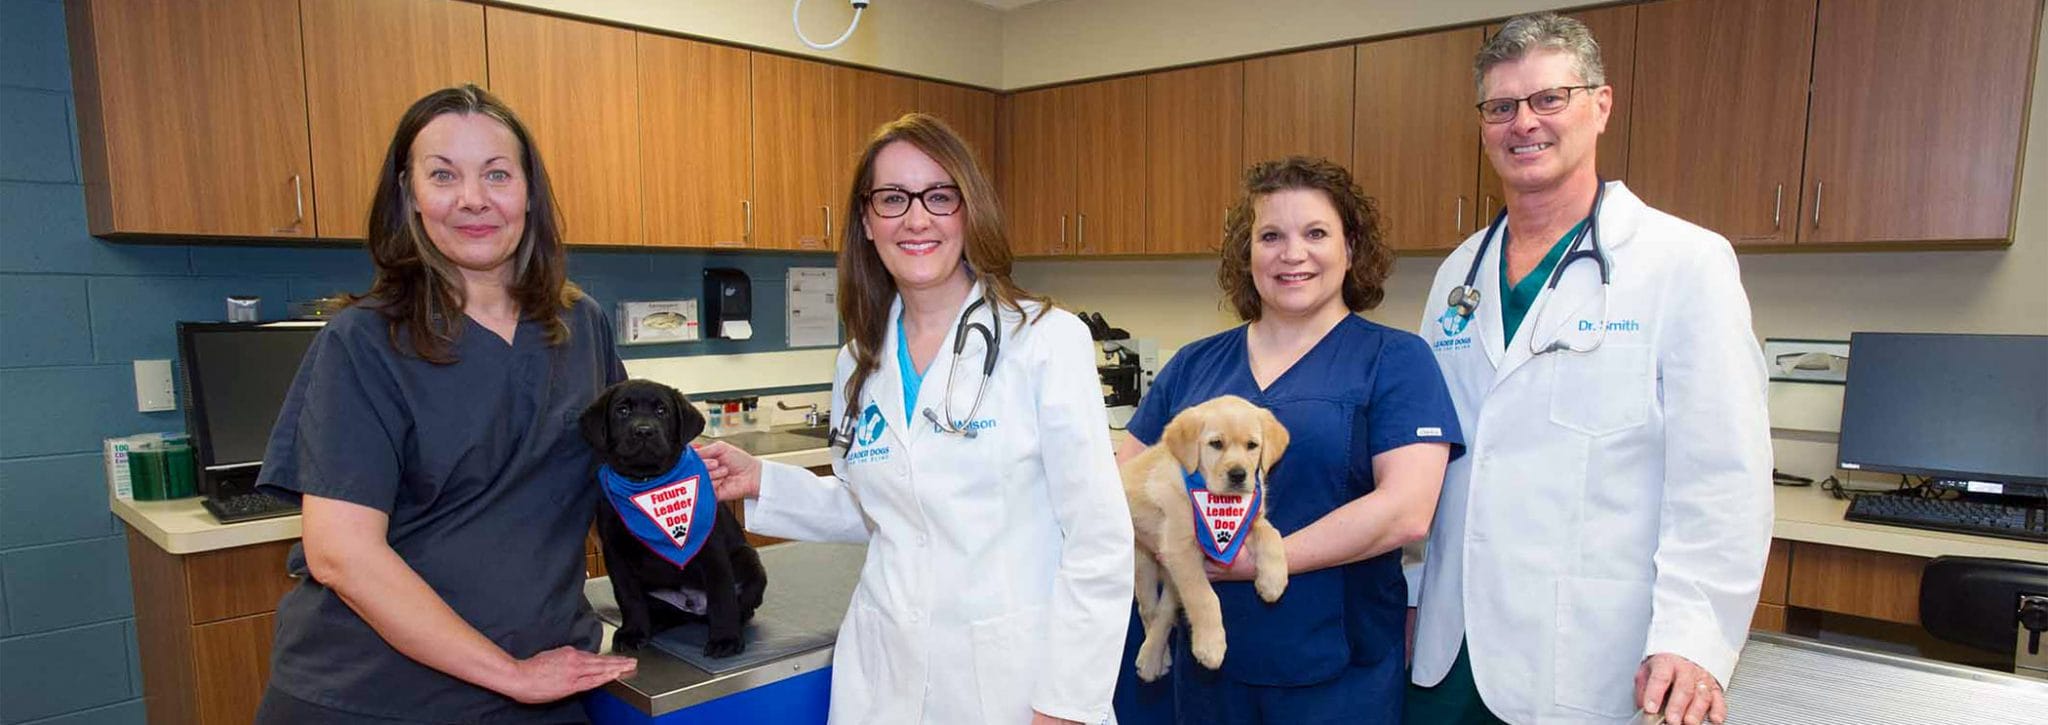 Three women and one man stand facing and camera and smiling in our brightly lit vet clinic. With them are two lab puppies, one black and one yellow, wearing Future Leader Dog bandannas